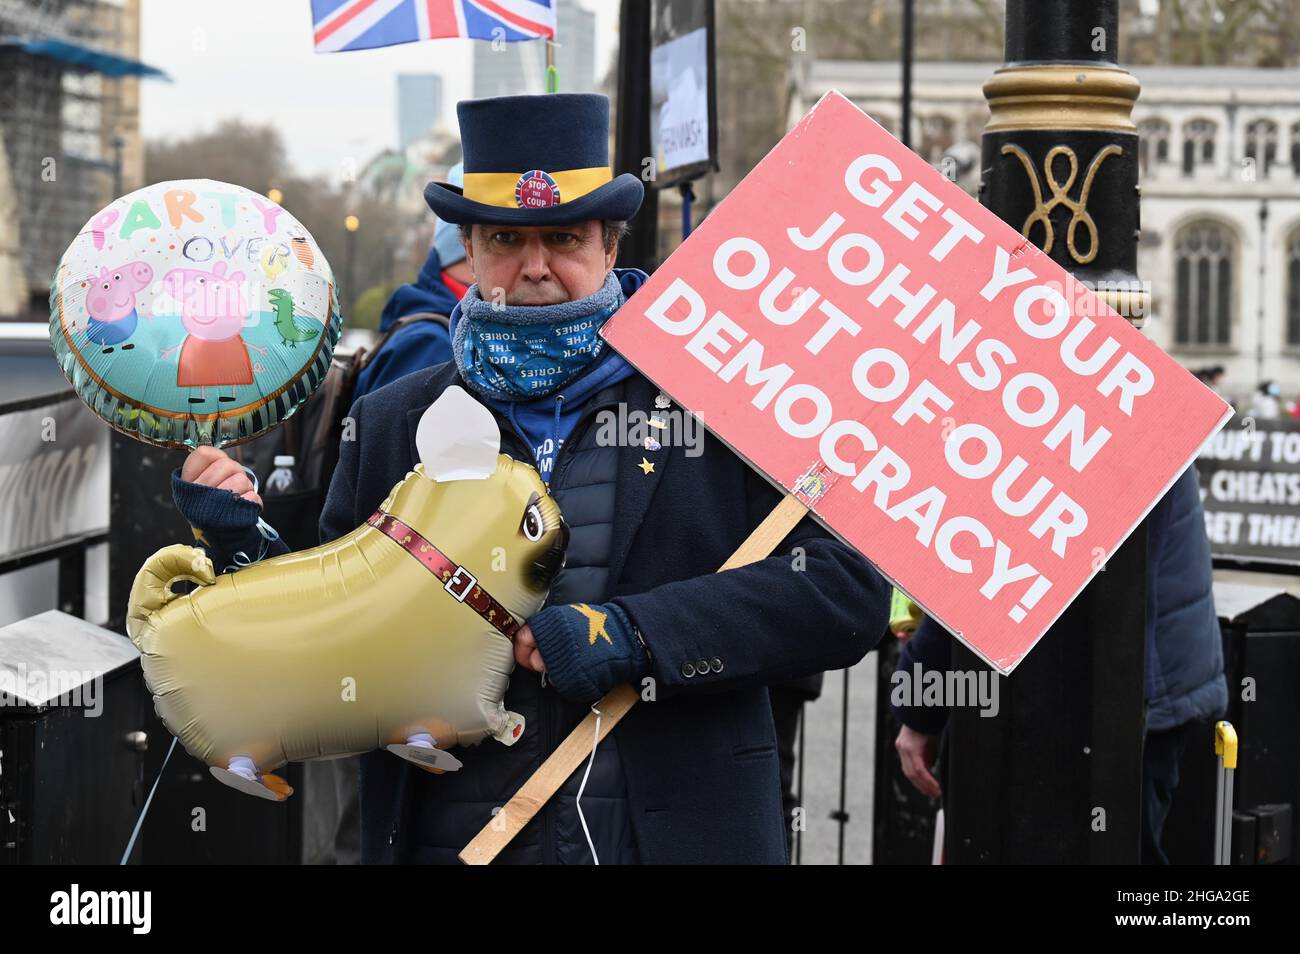 London, UK. Steve Bray from SODEM protested in favour of the removal of Boris Johnson as Prime Minister. He is pictured with a Peppa pig 'Party's Over' balloon and an inflatable 'big dog'. Houses of Parliament, Westminster. Stock Photo